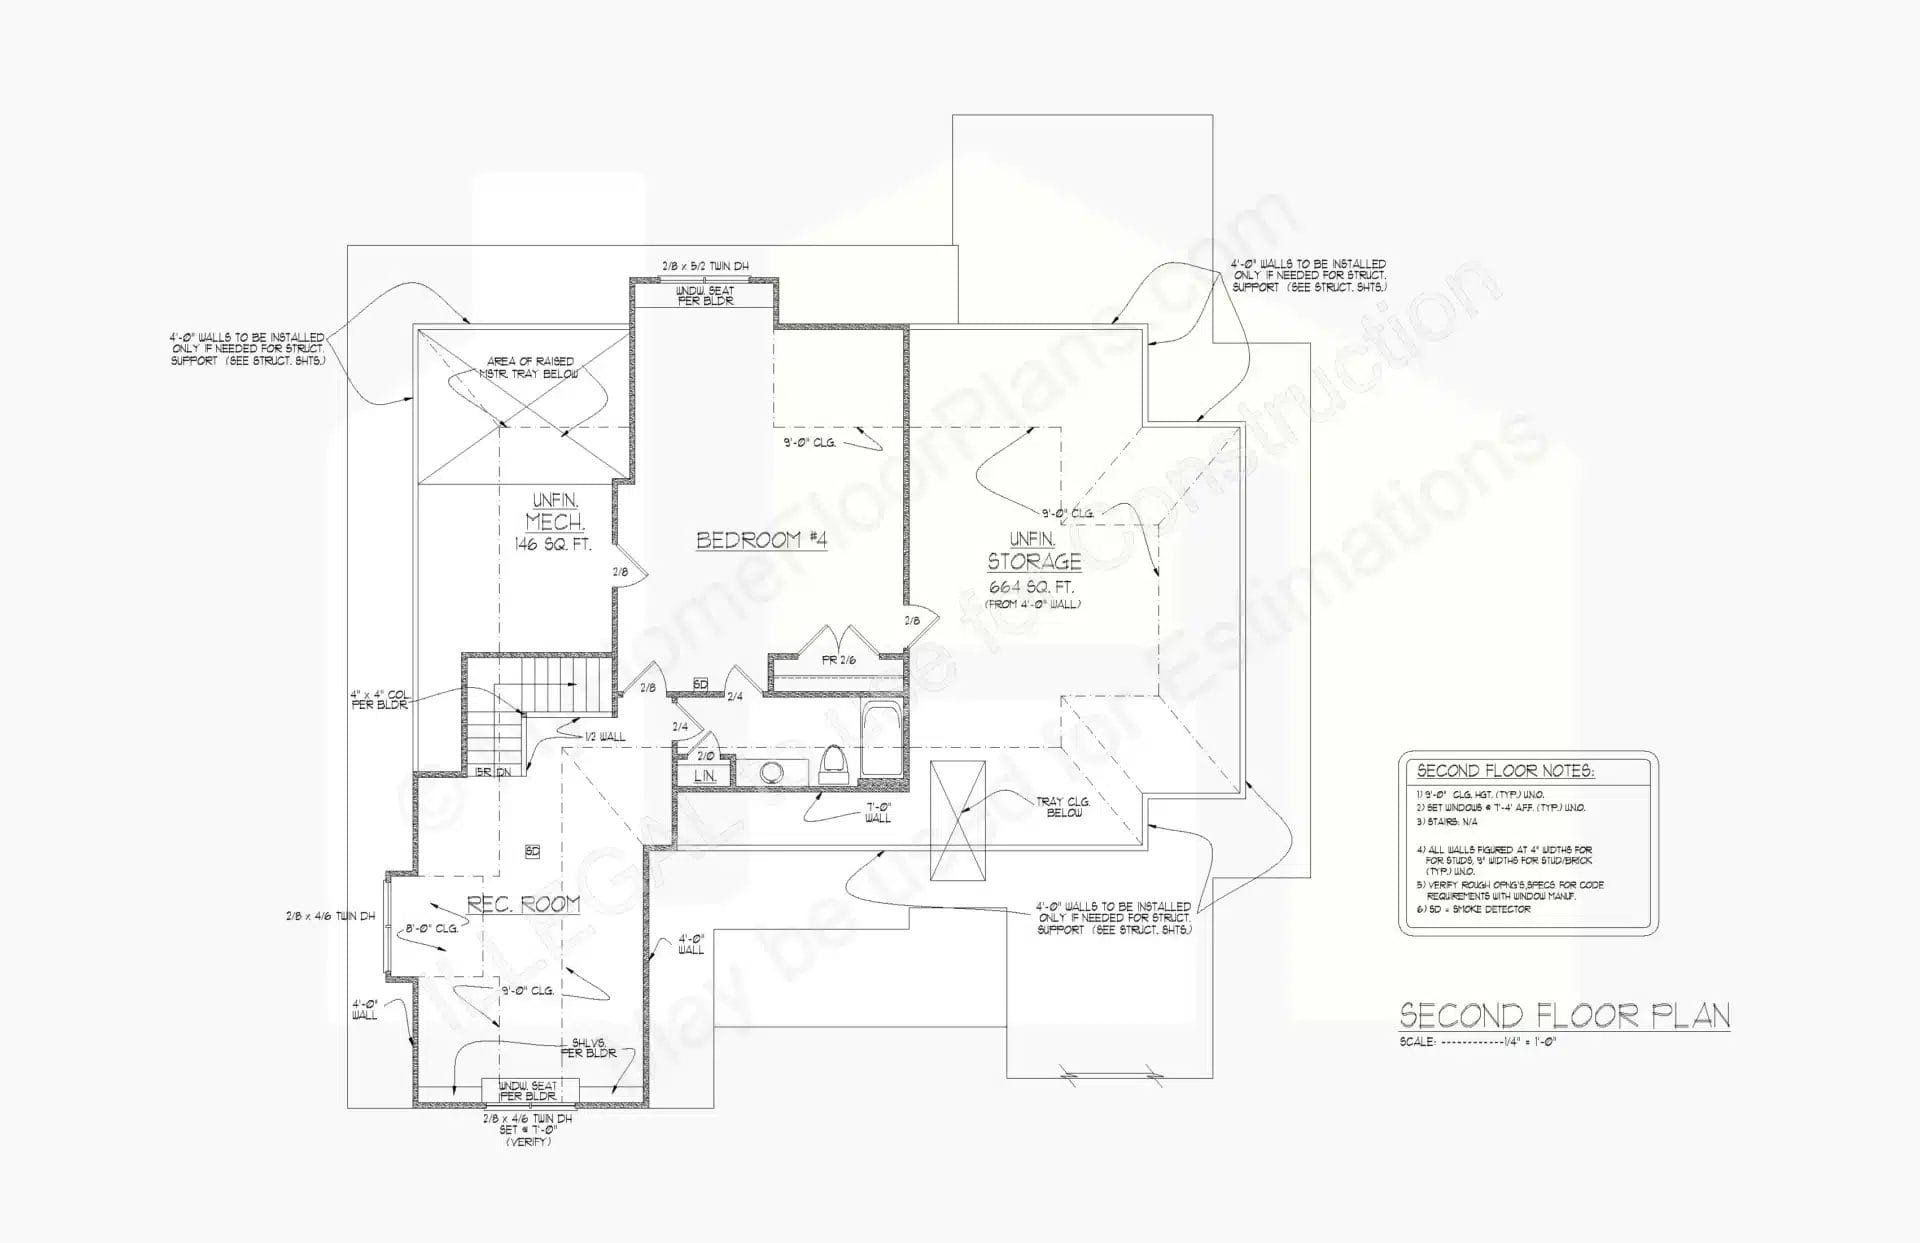 Detailed architectural blueprint of a second-floor design featuring layout plans for bedrooms, bathrooms, and storage areas, marked with dimensions and annotations for the 13-1721.